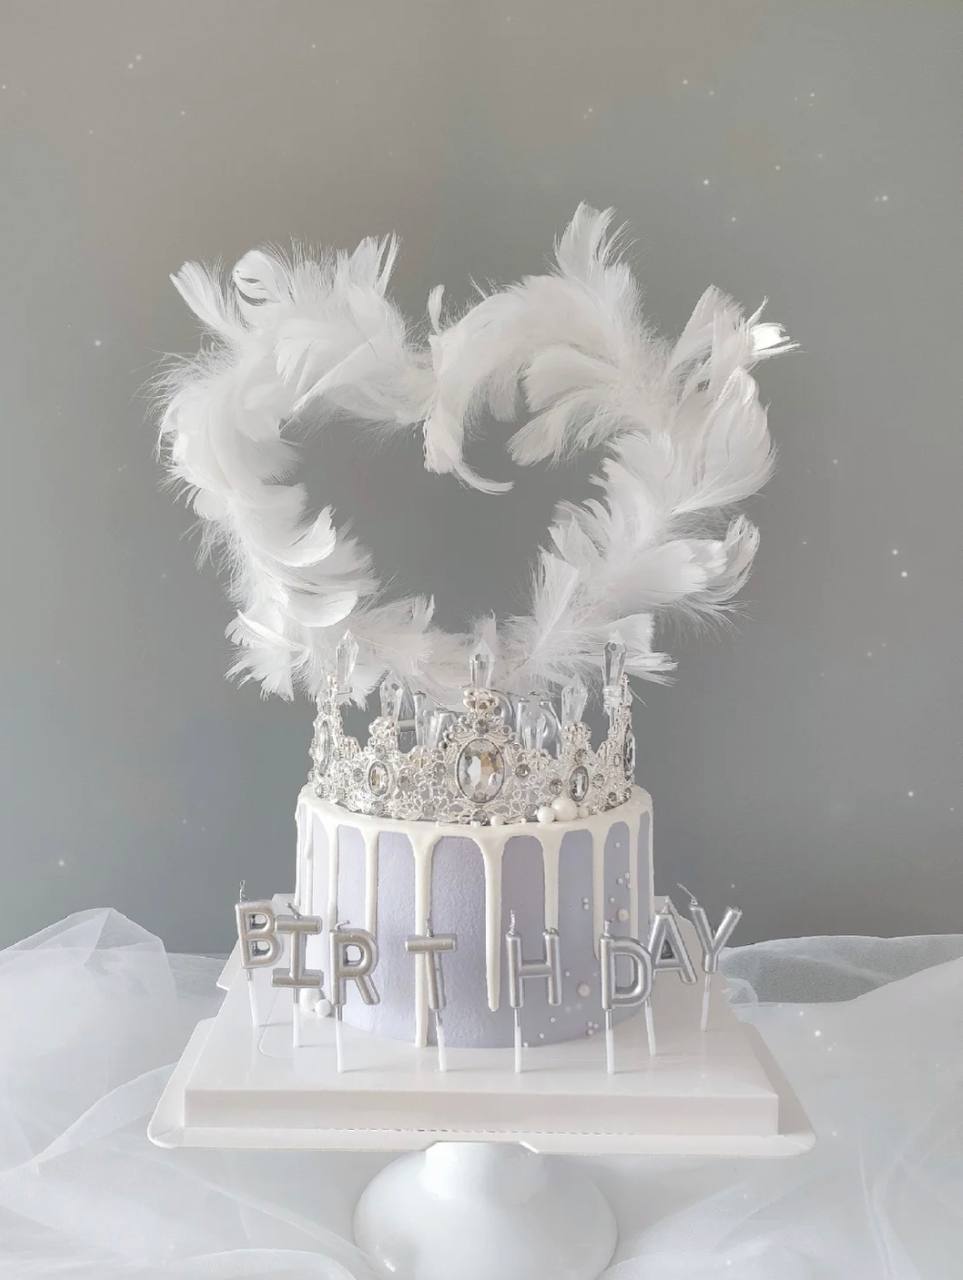 Queen of Hearts crown cake topper